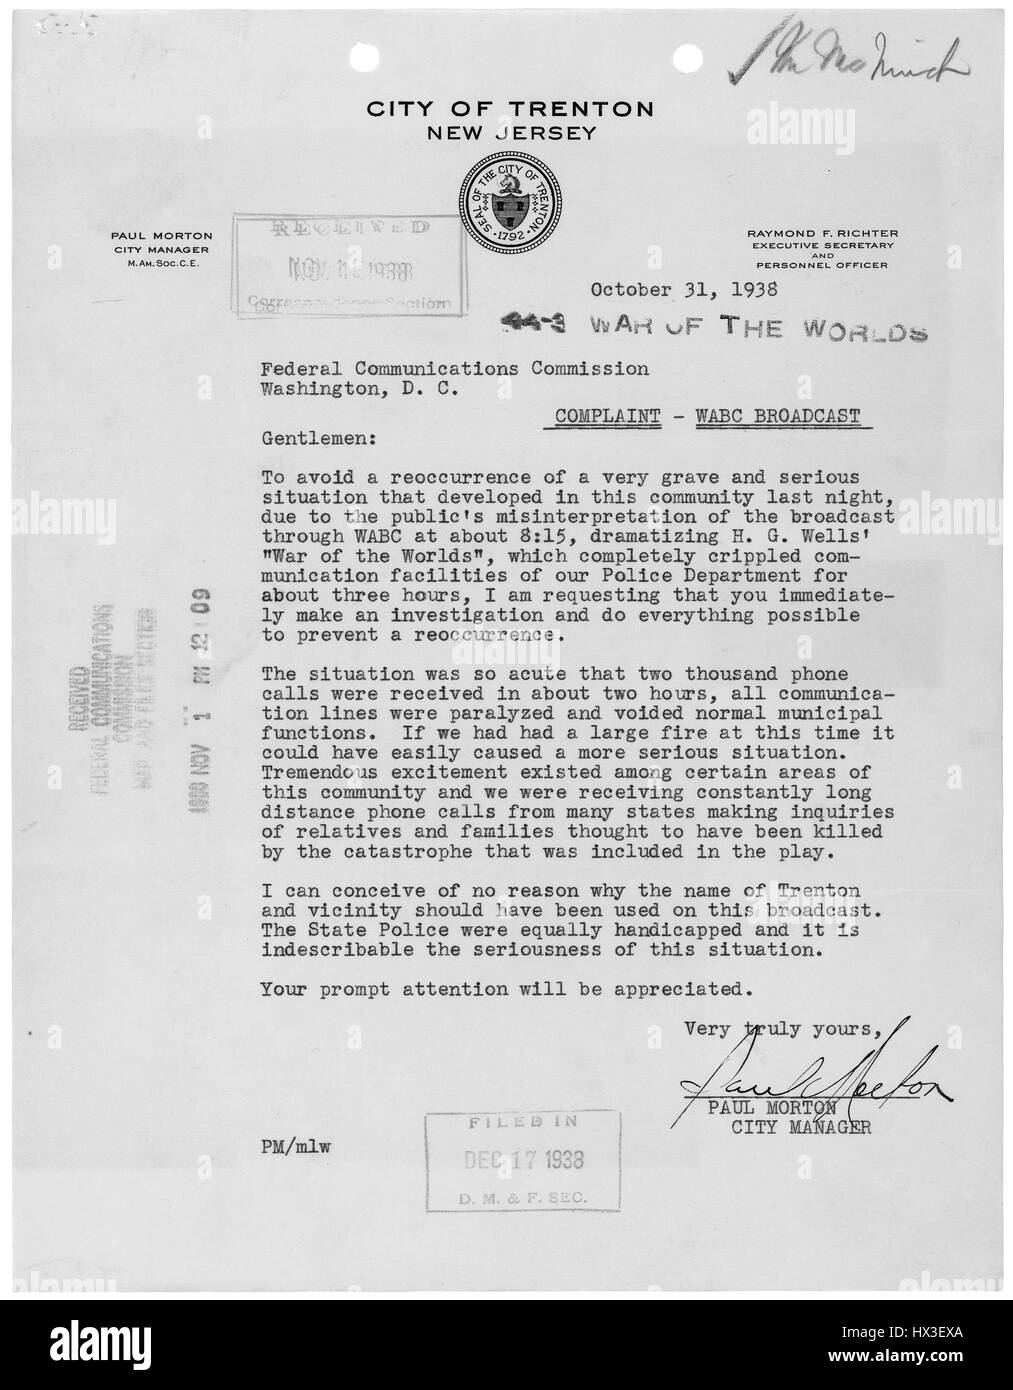 Letter from Paul Morton, the city manager of Trenton, New Jersey, regarding the War of the Worlds radio broadcast and the effect it caused in the city, October 31, 1938. Image courtesy National Archives. Stock Photo